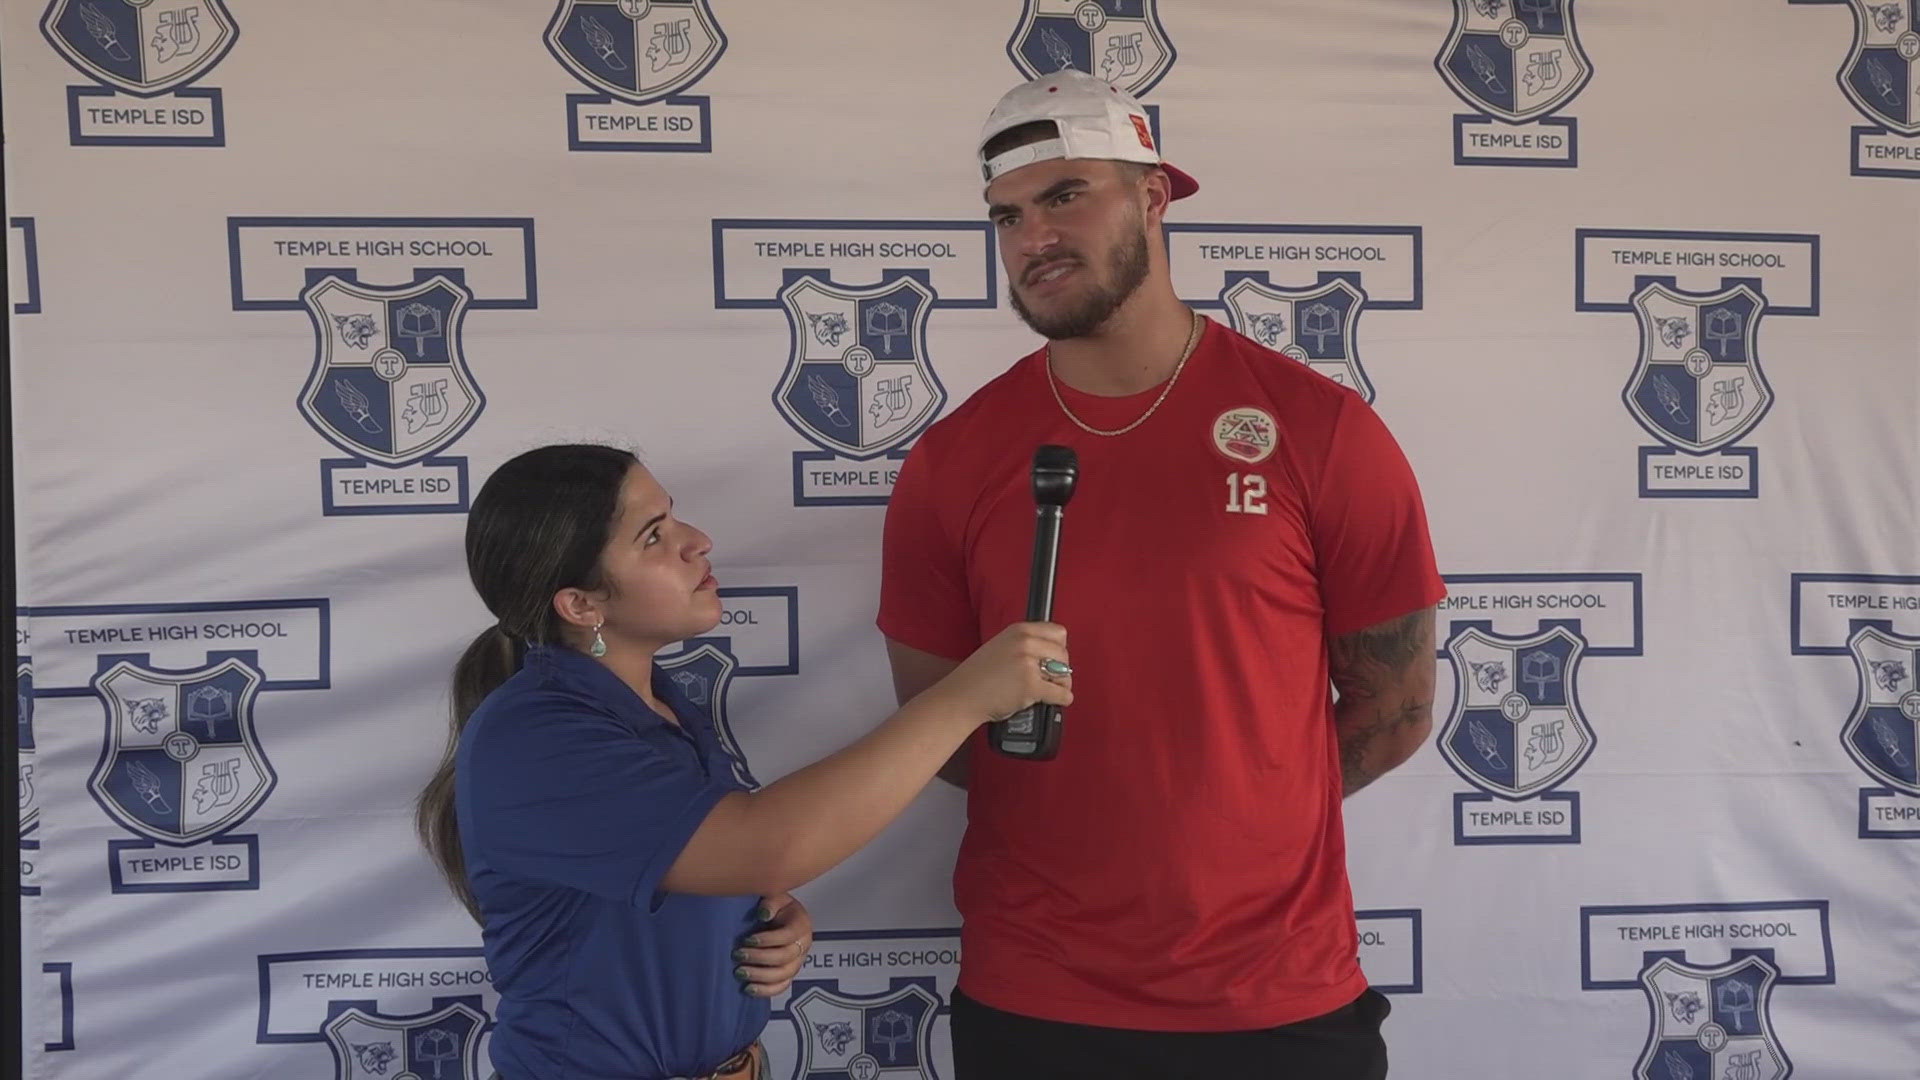 The NFL tight end hosted a free meet and greet event at Bold Republic Brewing.